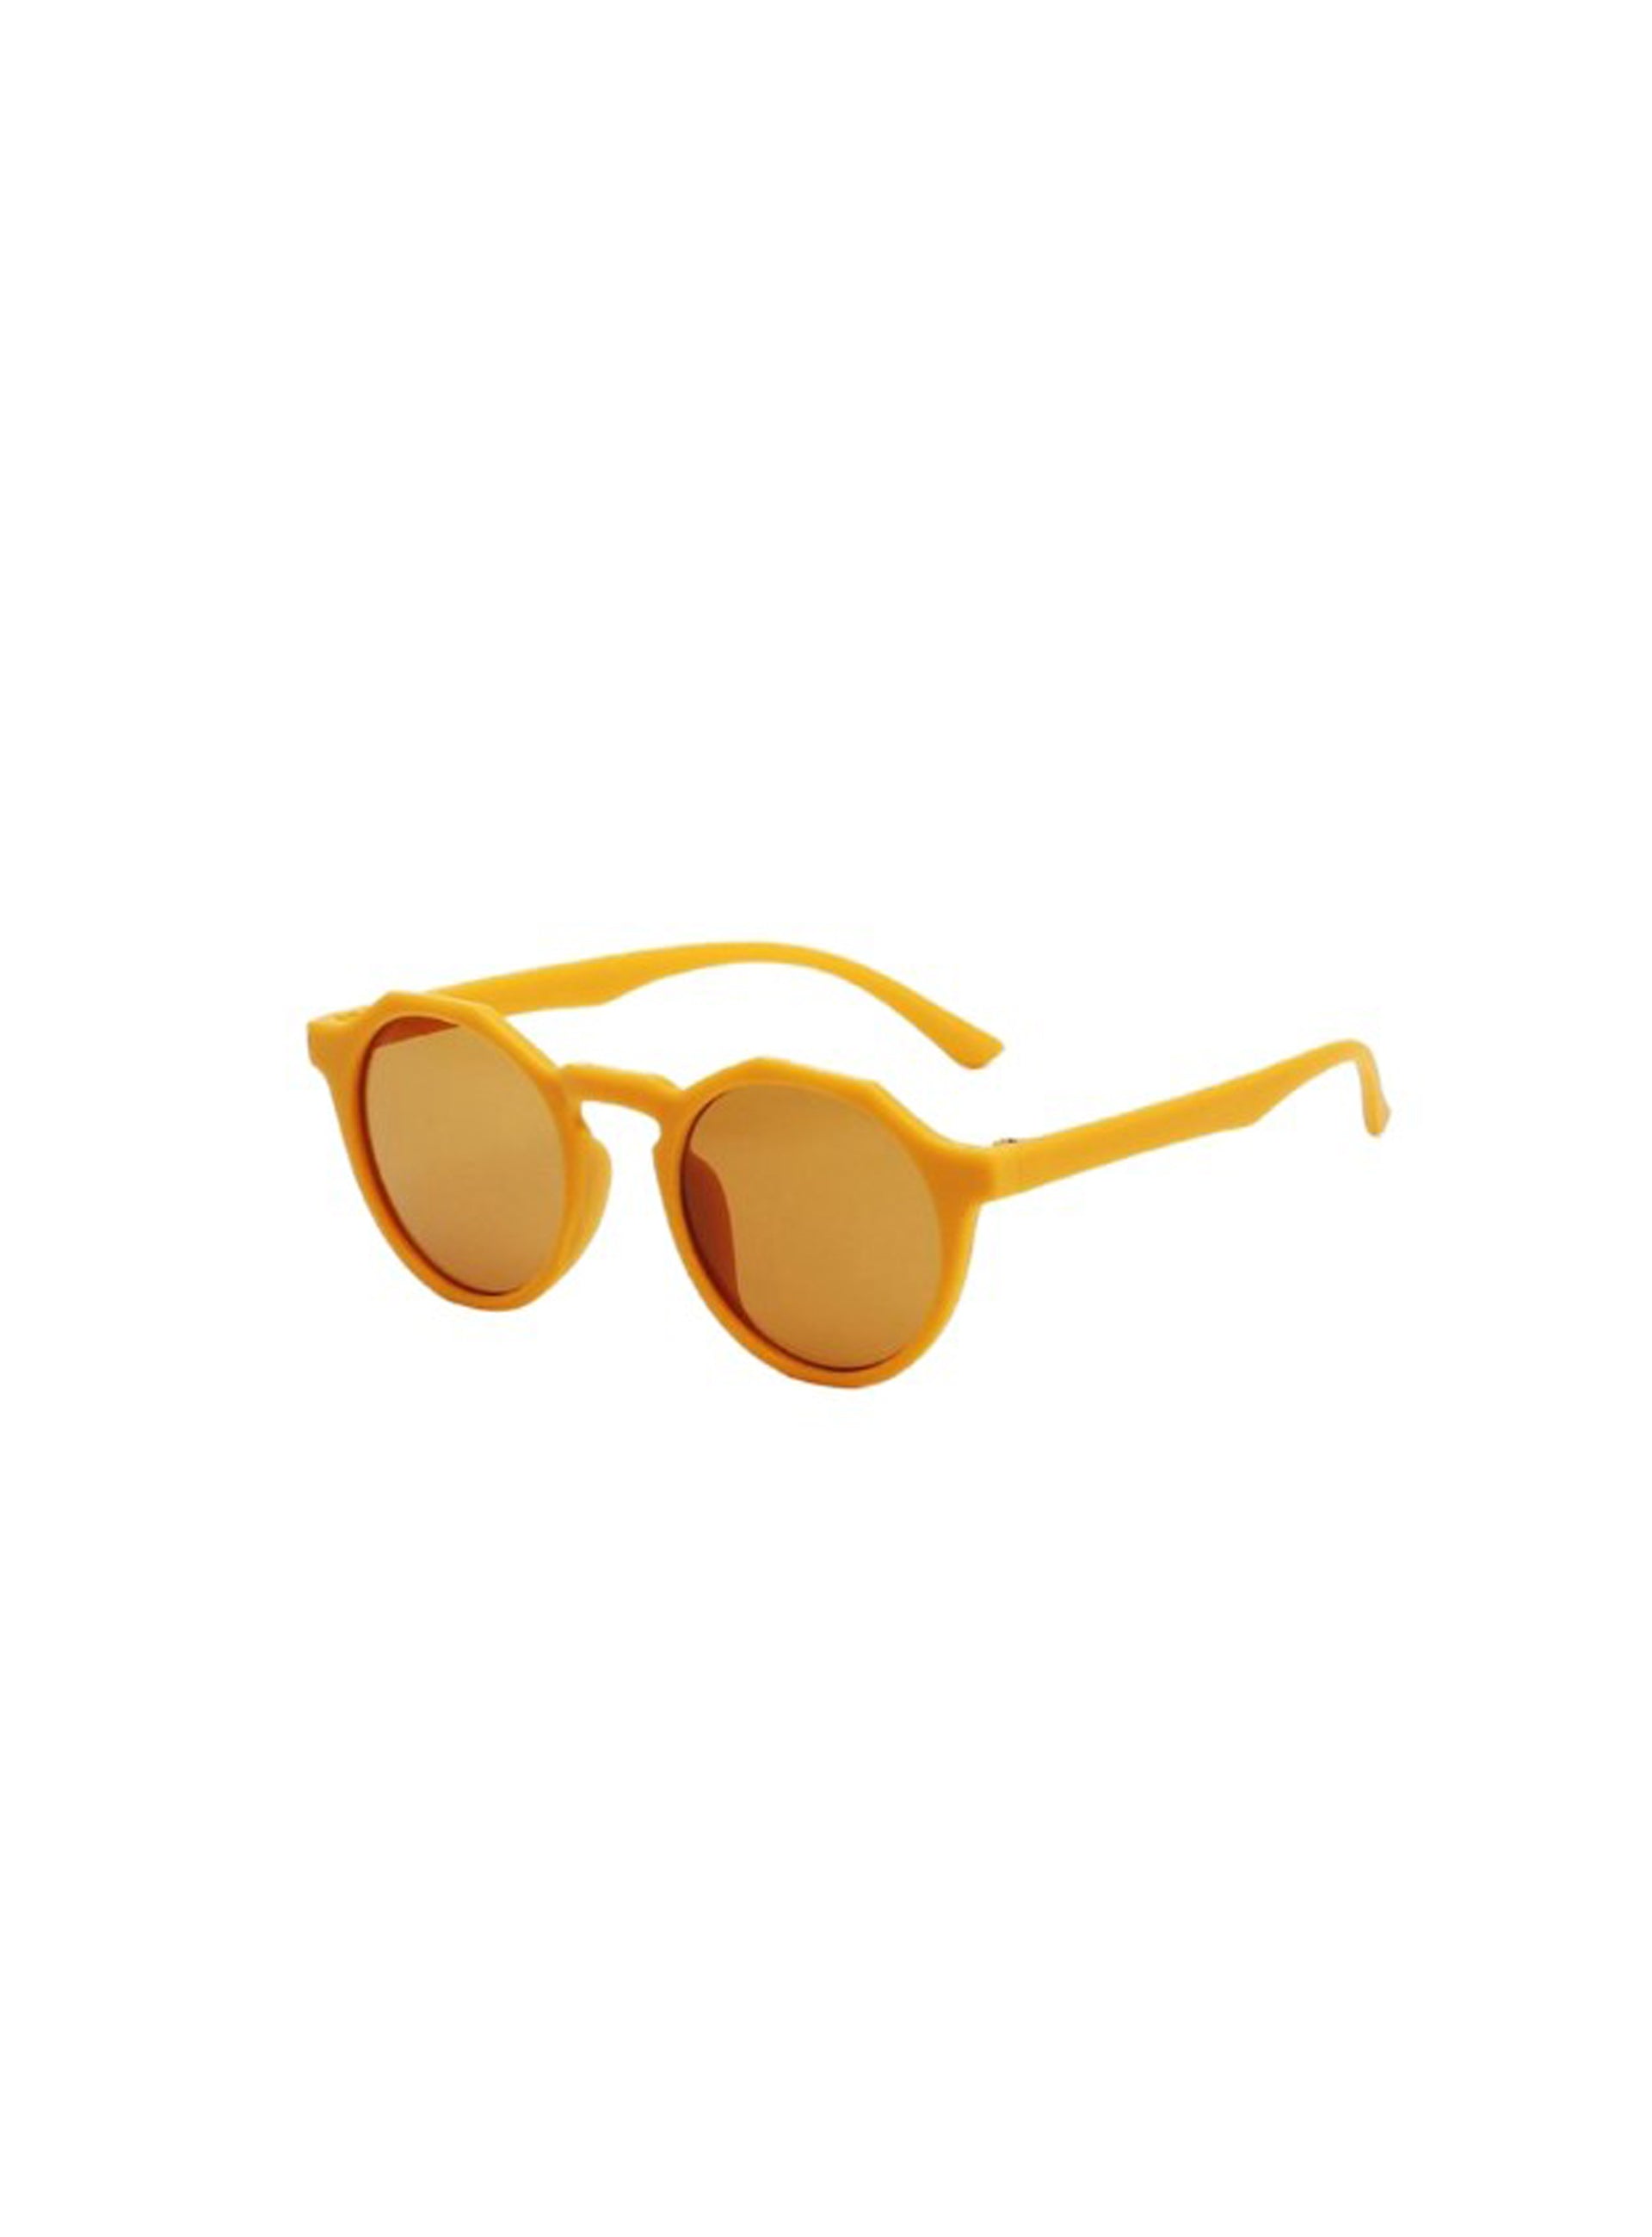 chiselled canary yellow sunglasses